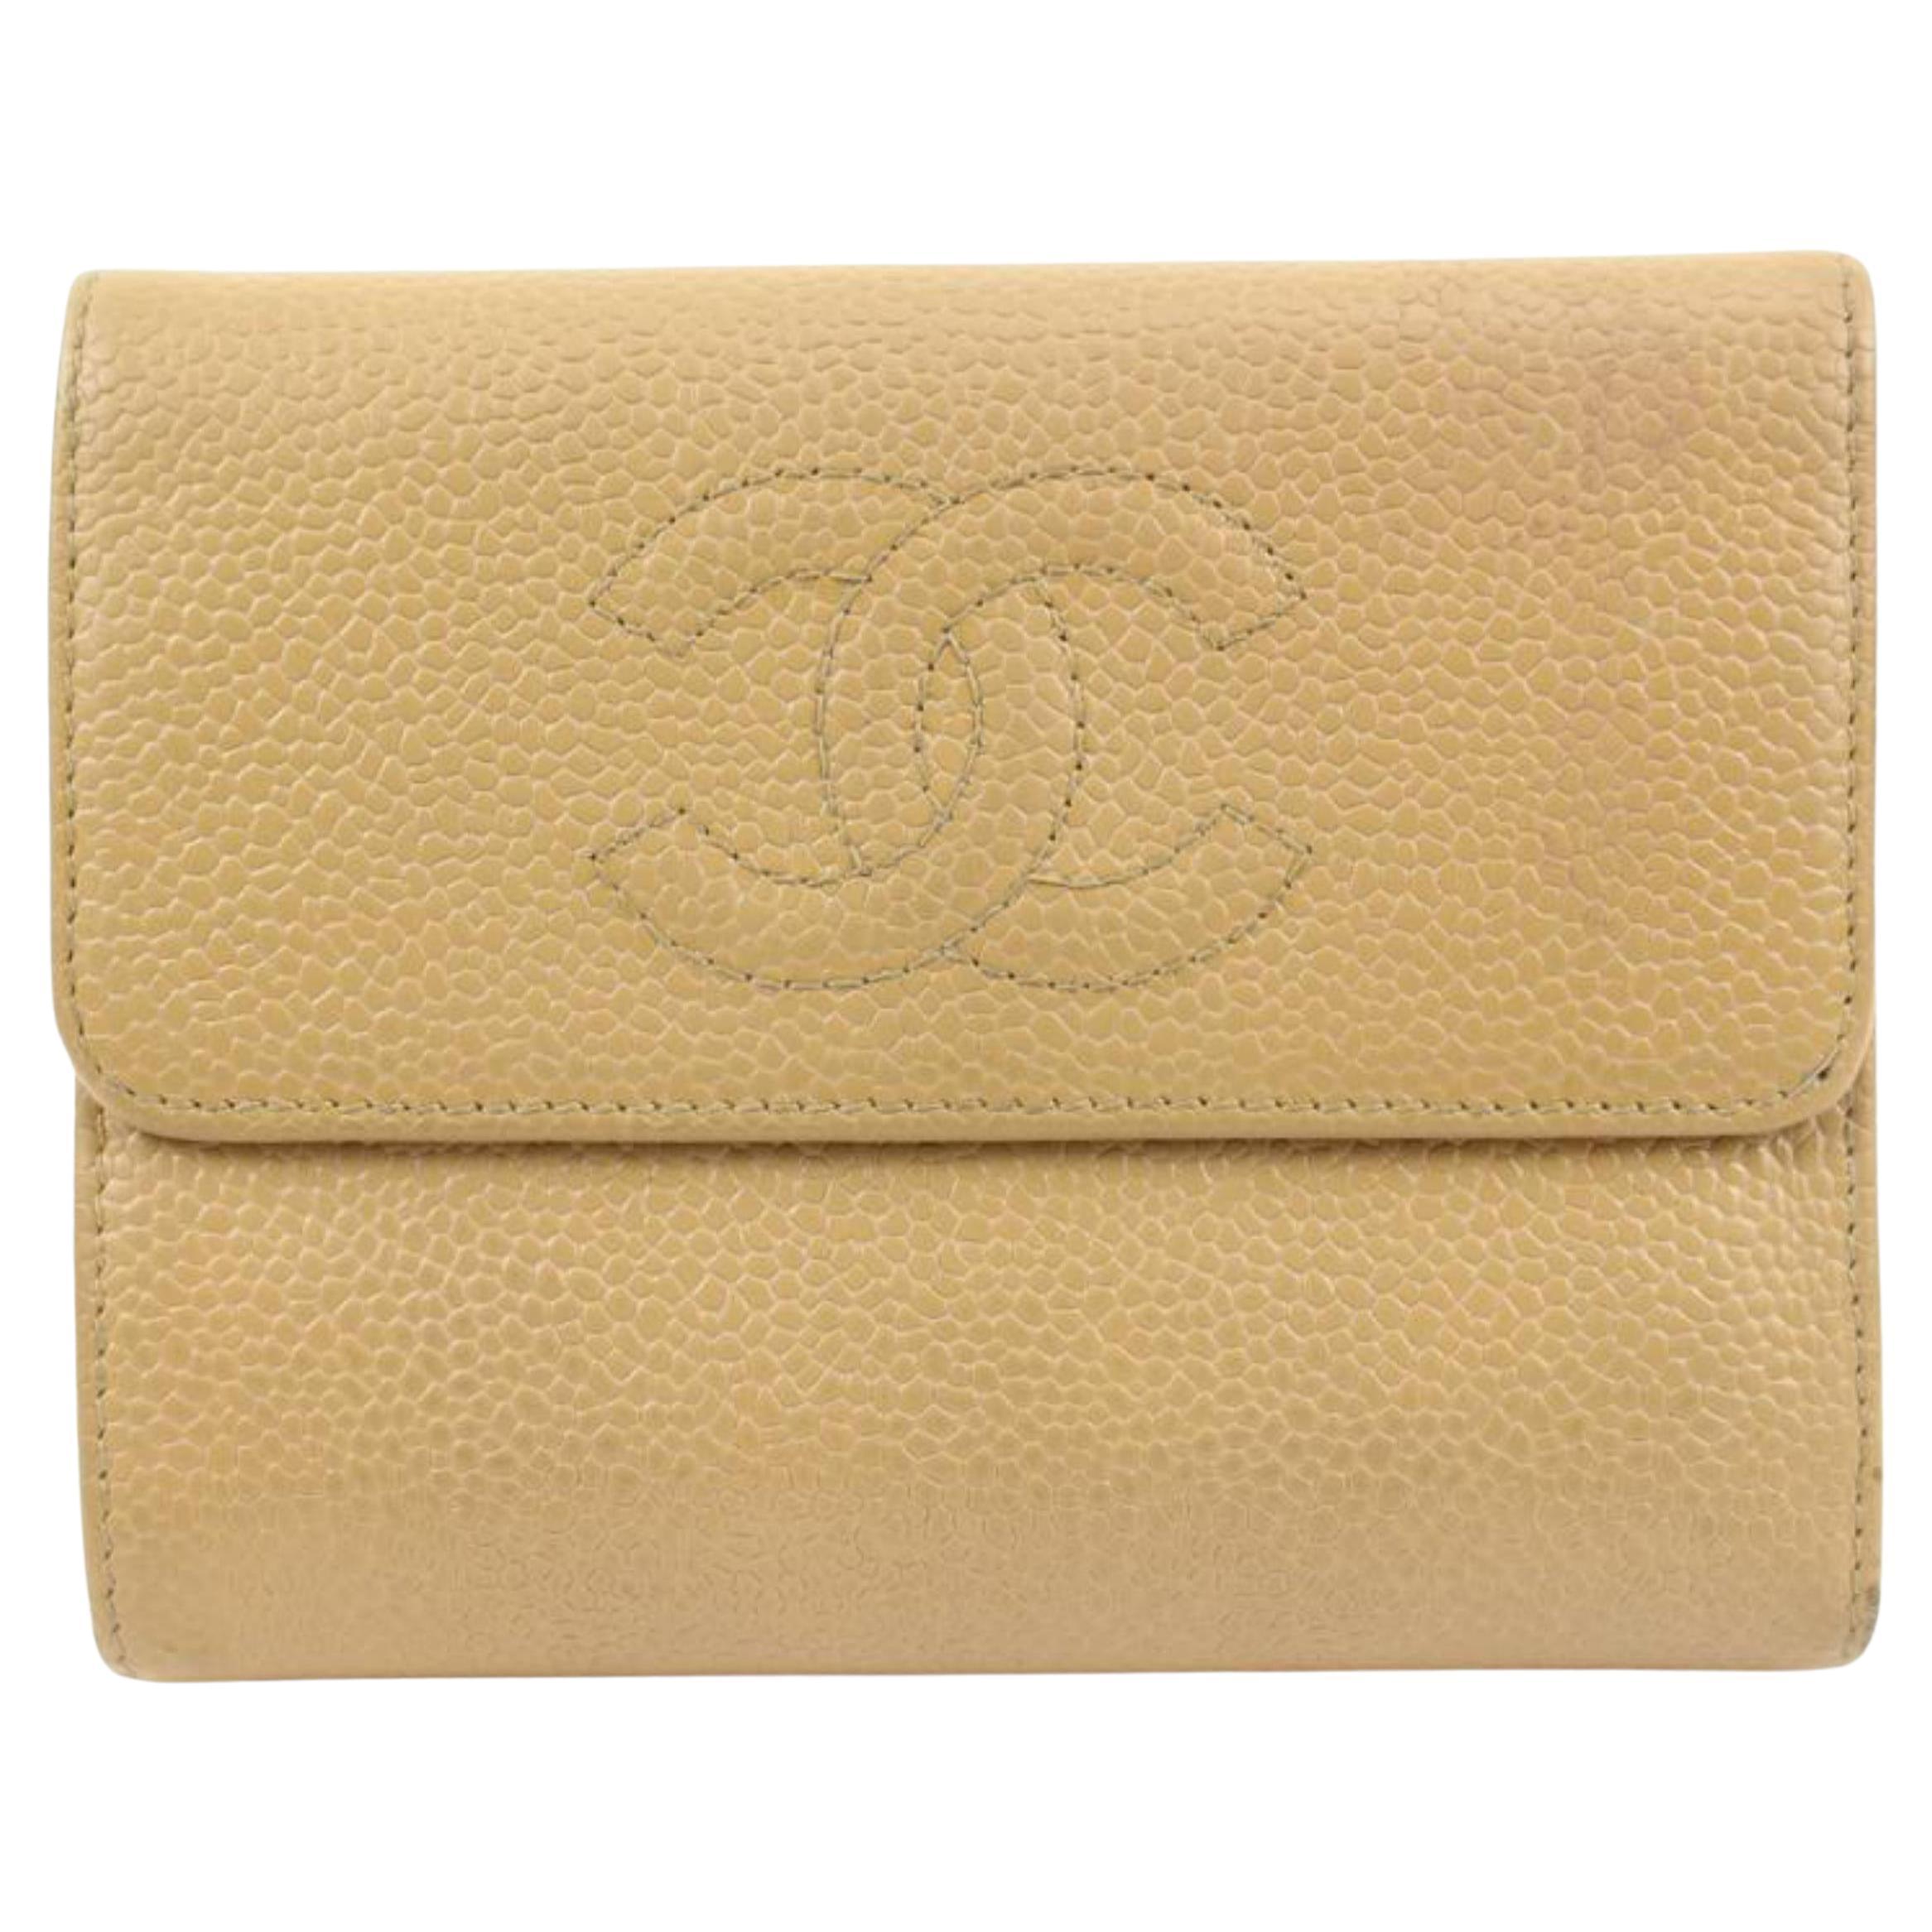 Chanel CC Logo Trifold Compact Wallet